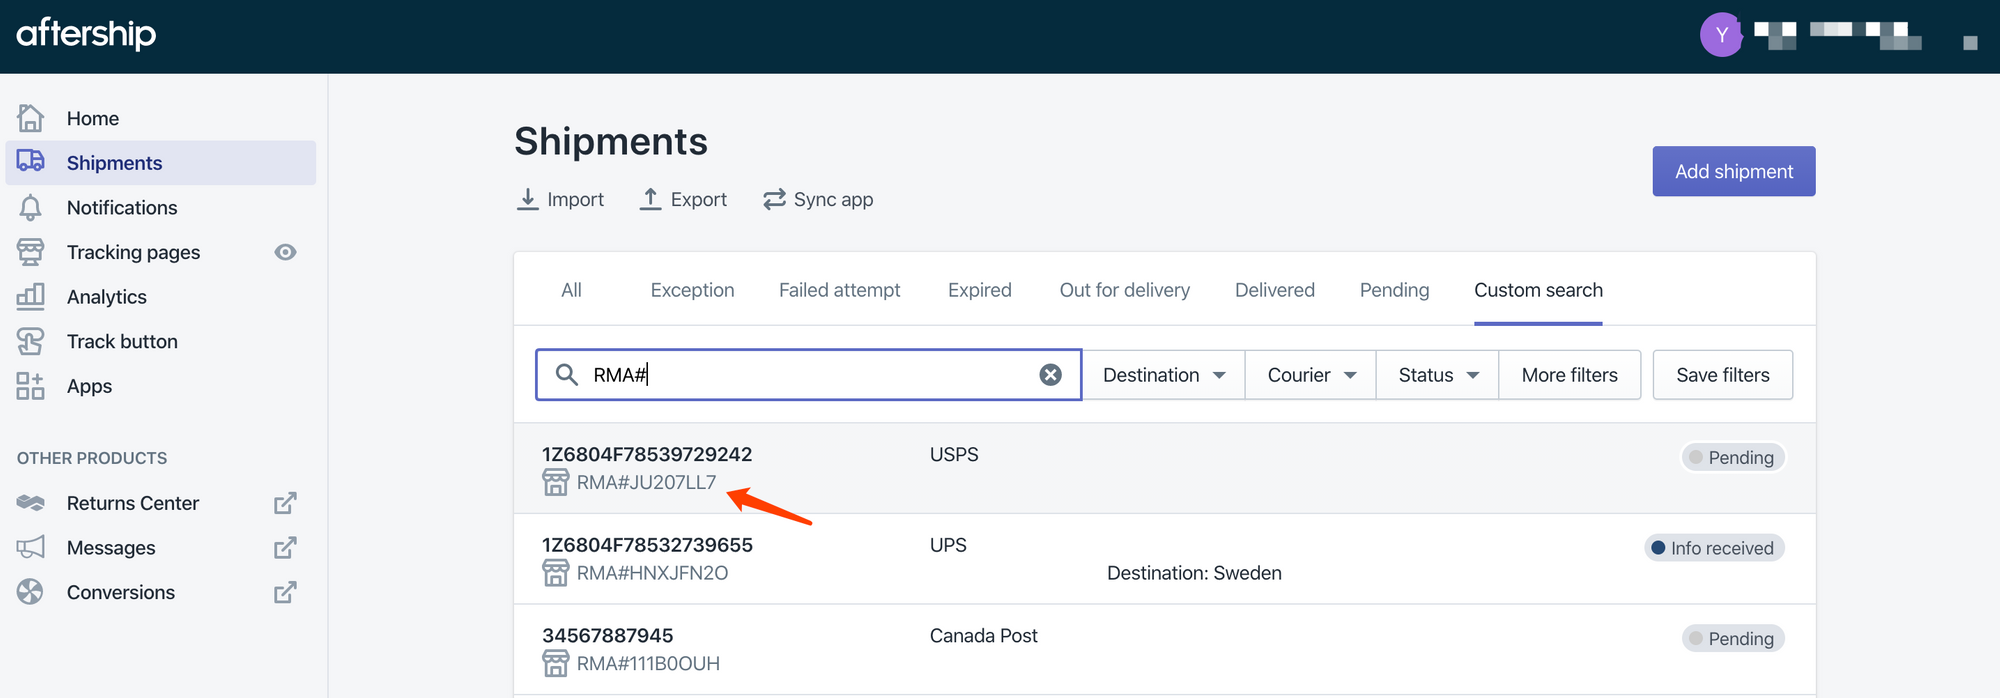 New feature: Track return shipments at one place